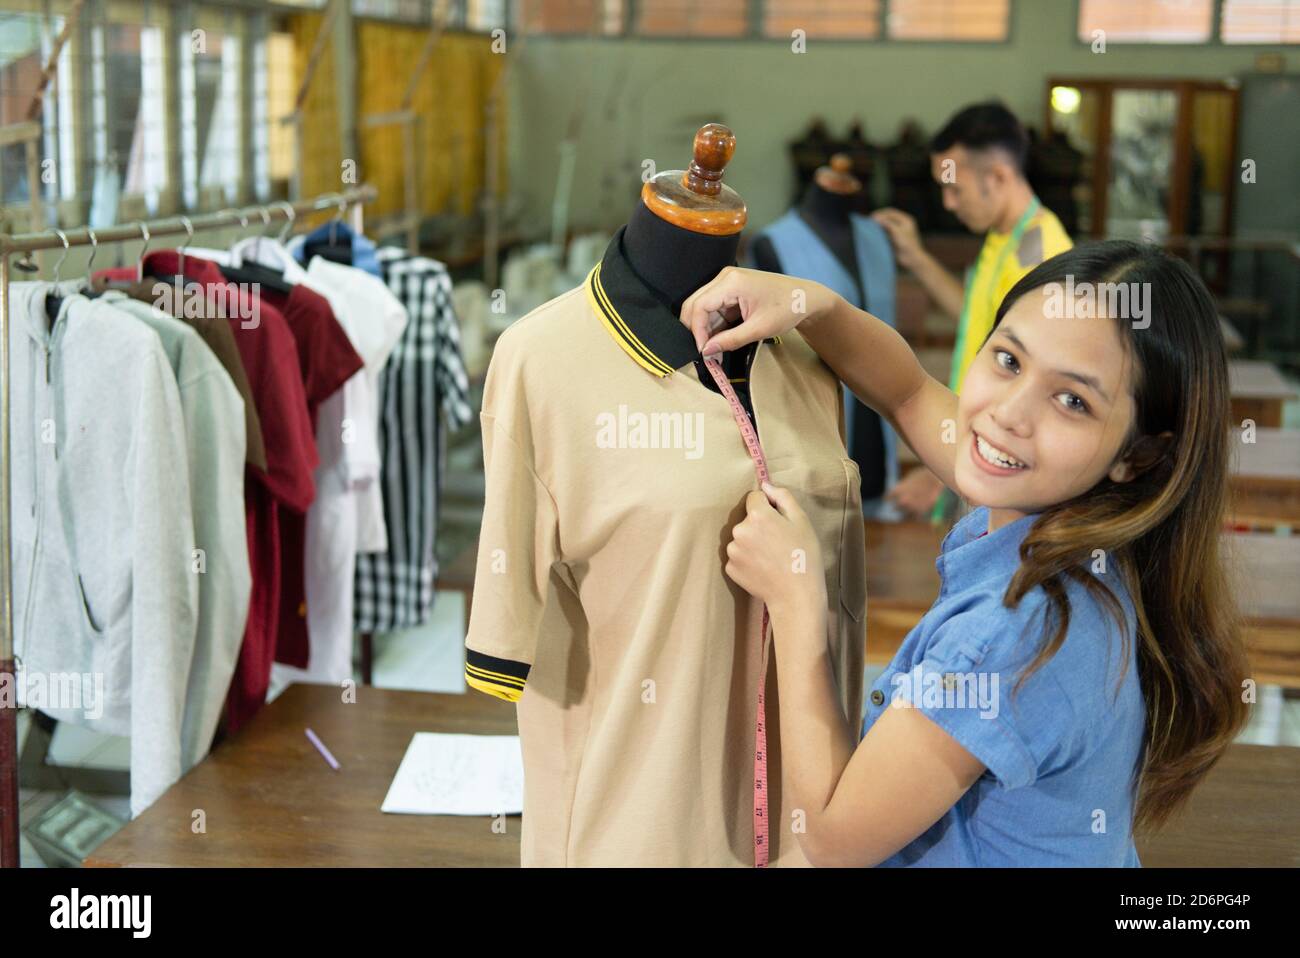 https://c8.alamy.com/comp/2D6PG4P/beautiful-tailor-women-smiling-when-measure-the-mannequin-chest-width-with-tape-measure-at-the-clothing-garment-room-2D6PG4P.jpg